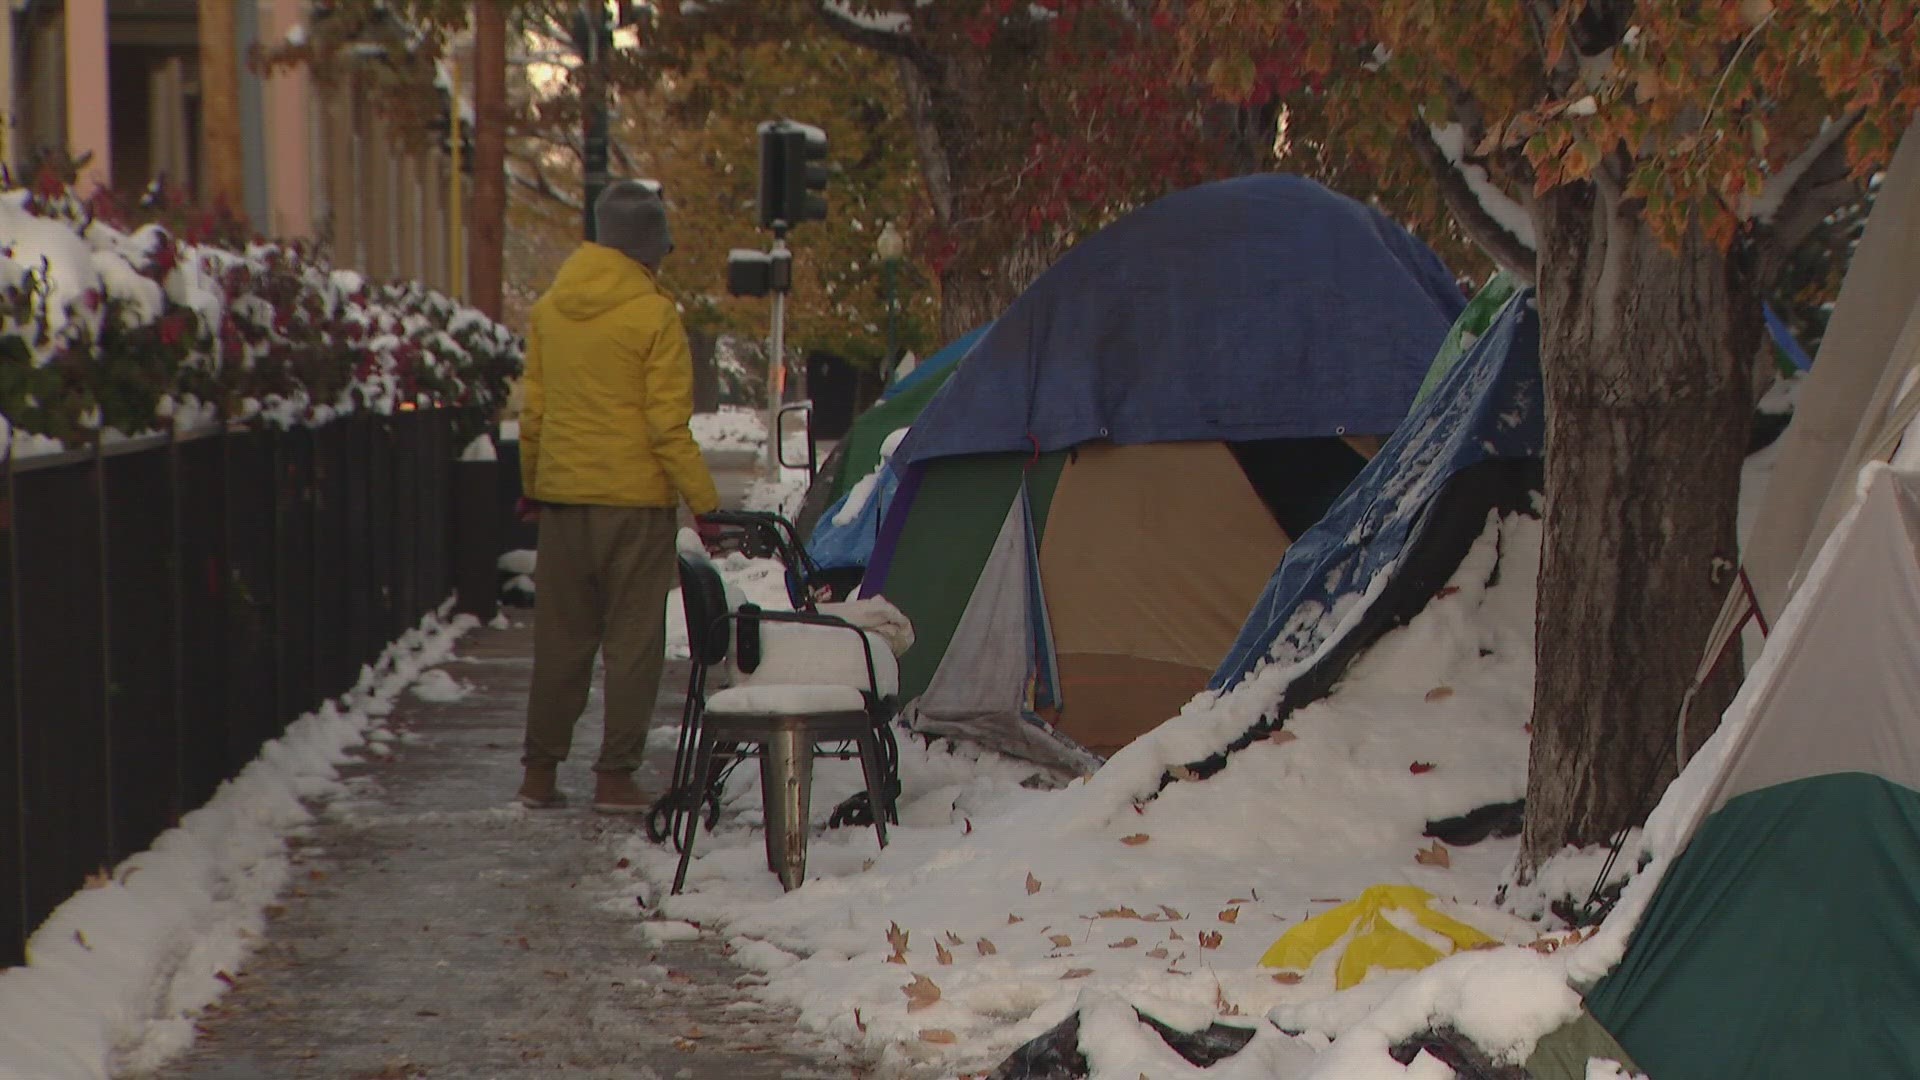 The state has offered a list of warming shelters across Colorado.